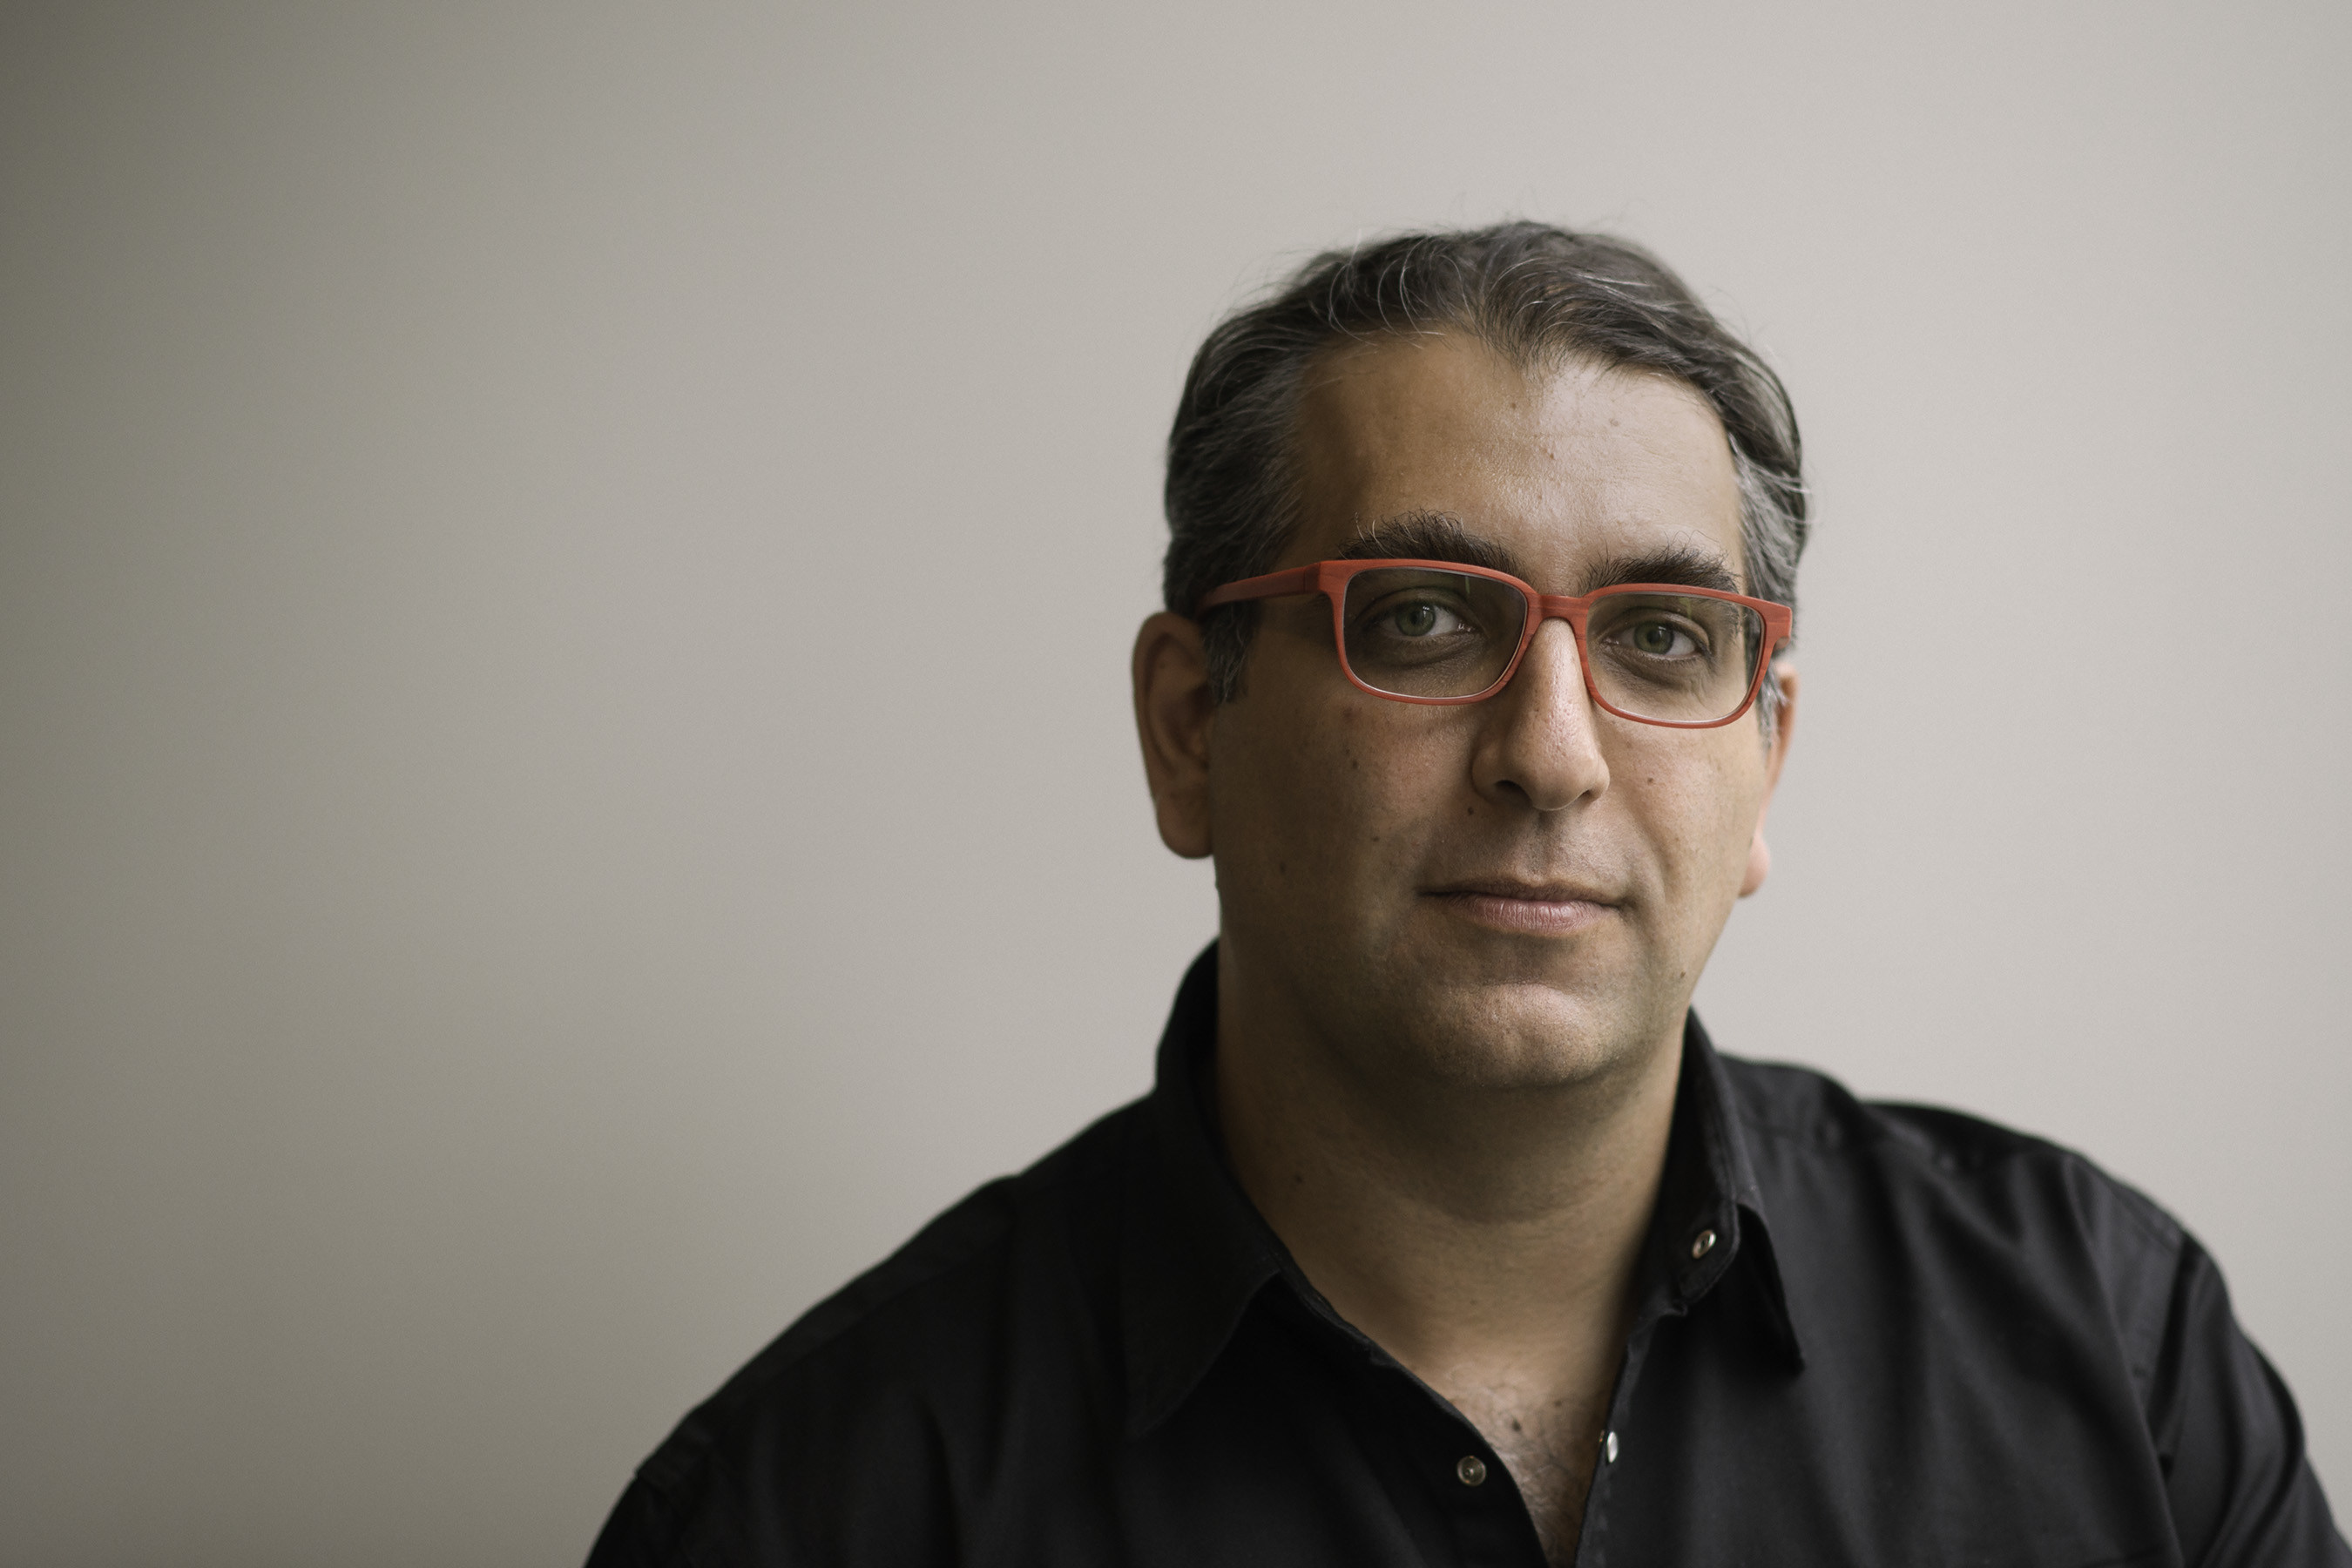 Fred Ghahramani is a tech entrepreneur, privacy advocate and the CEO and Founder of Just10.